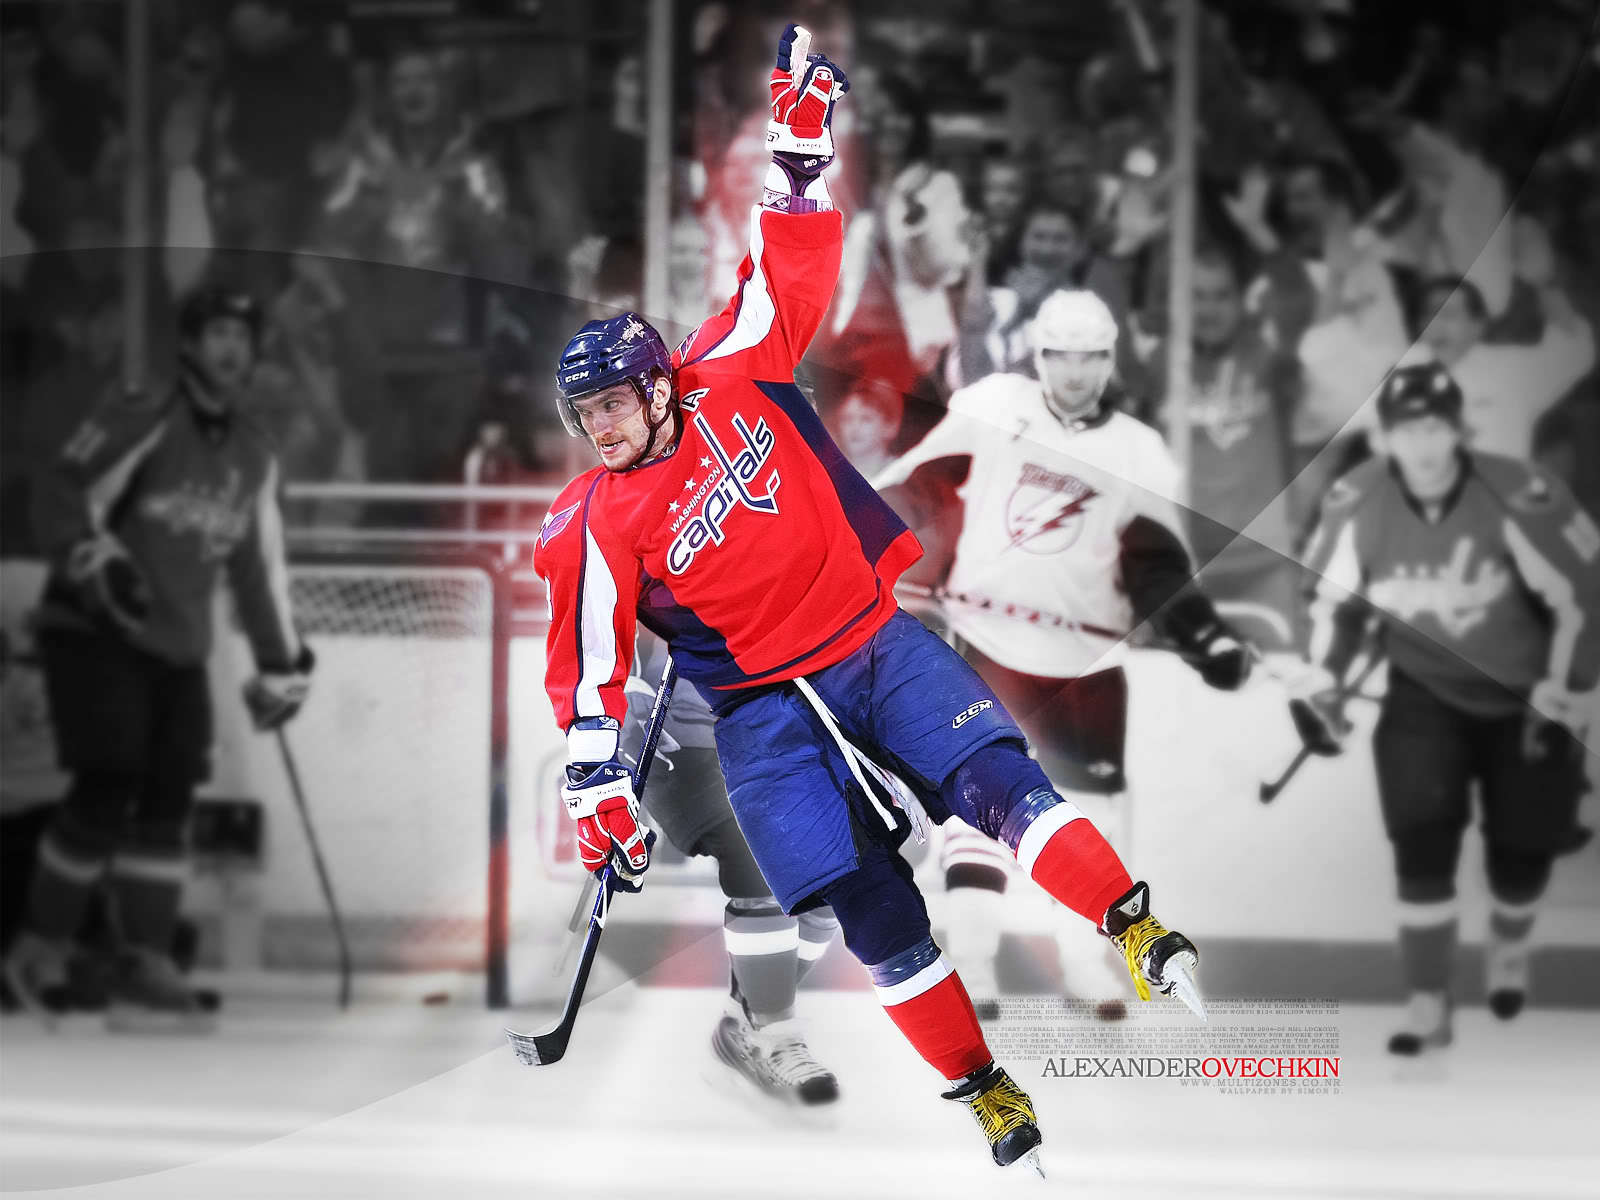 Famous Hockey player Washington Alexander Ovechkin wallpapers and other